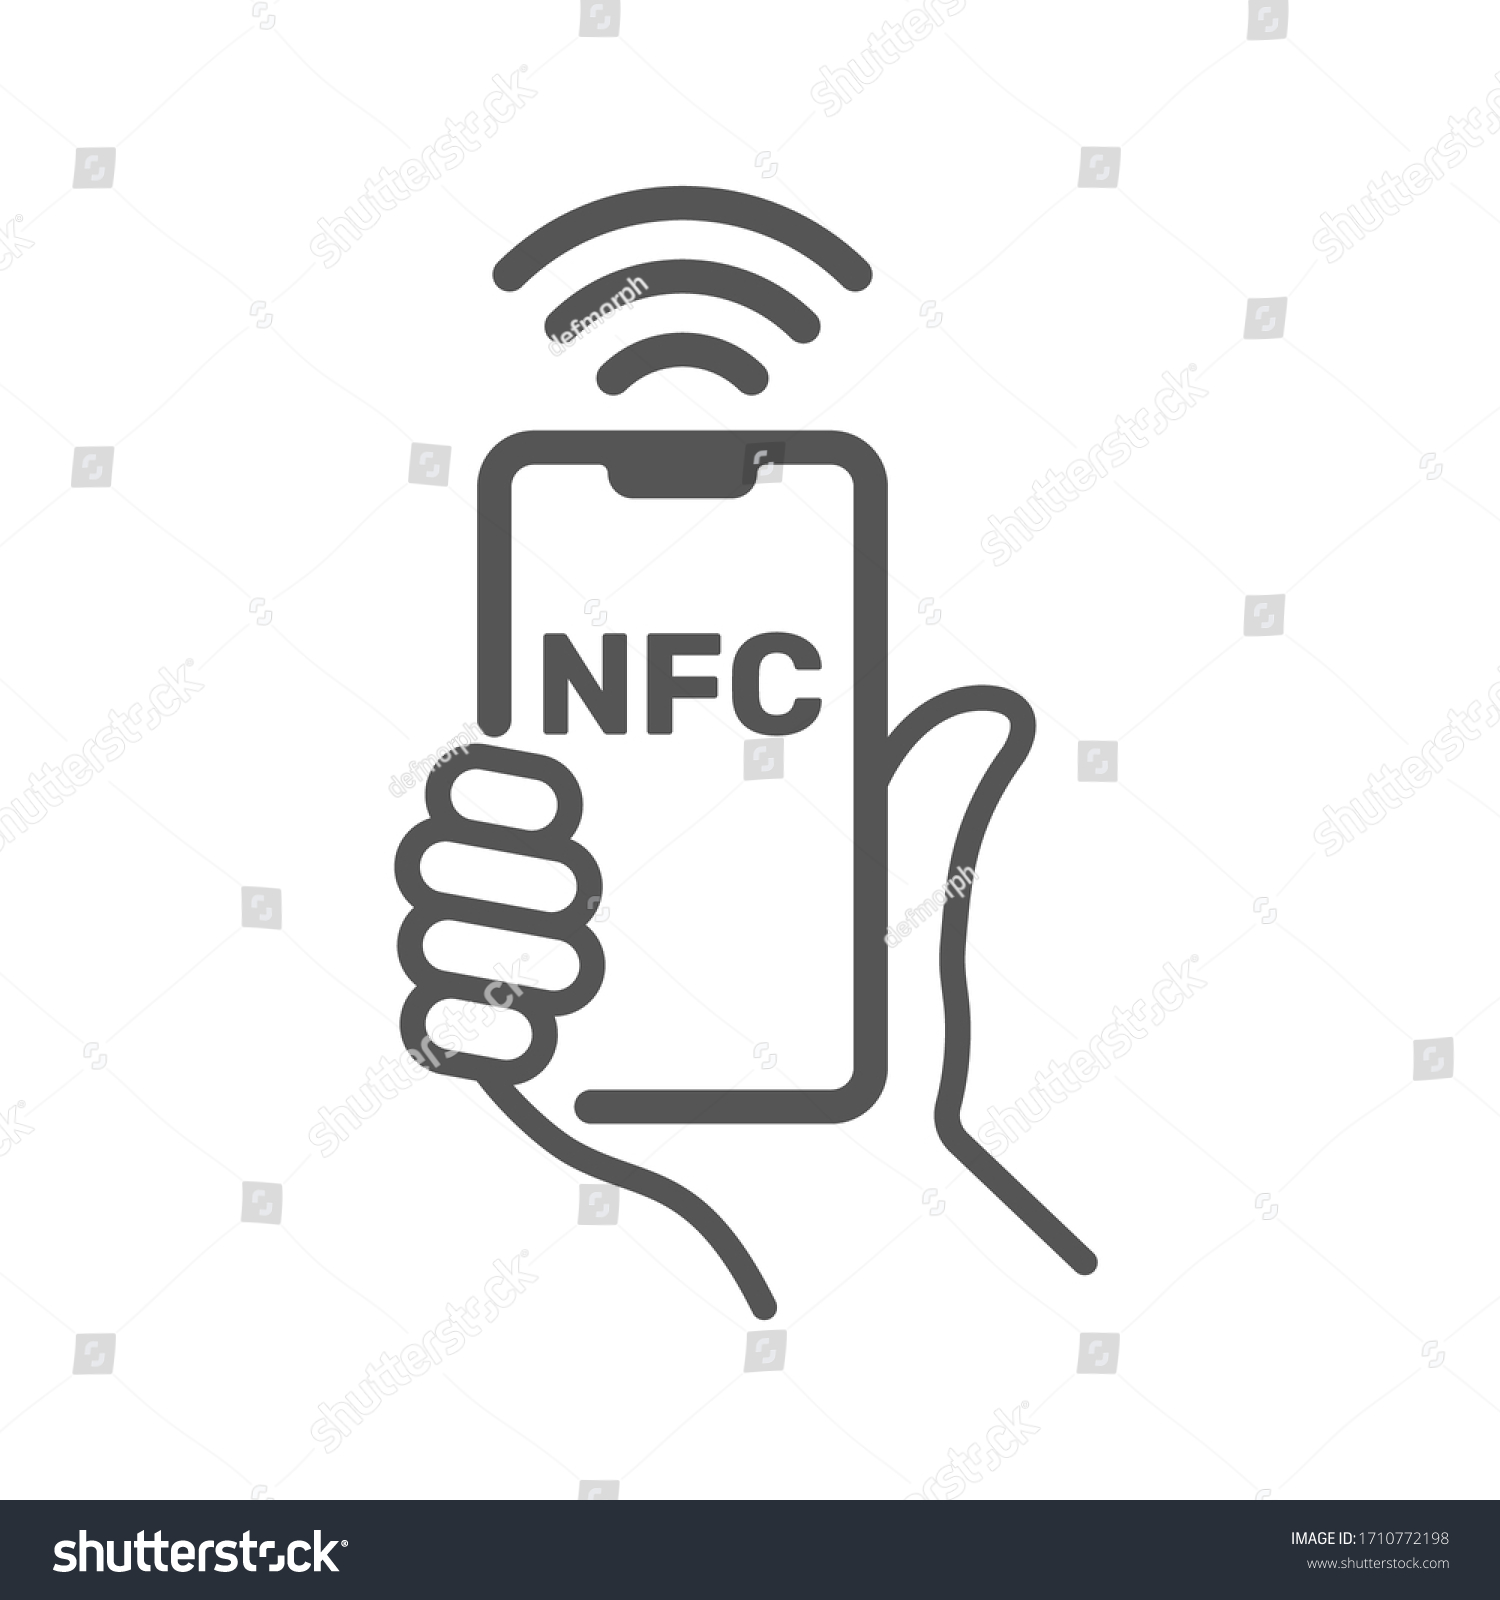 Near field communication, NFC  mobile phone, NFC payment with mobile phone smartphone flat vector icon for apps and websites #1710772198